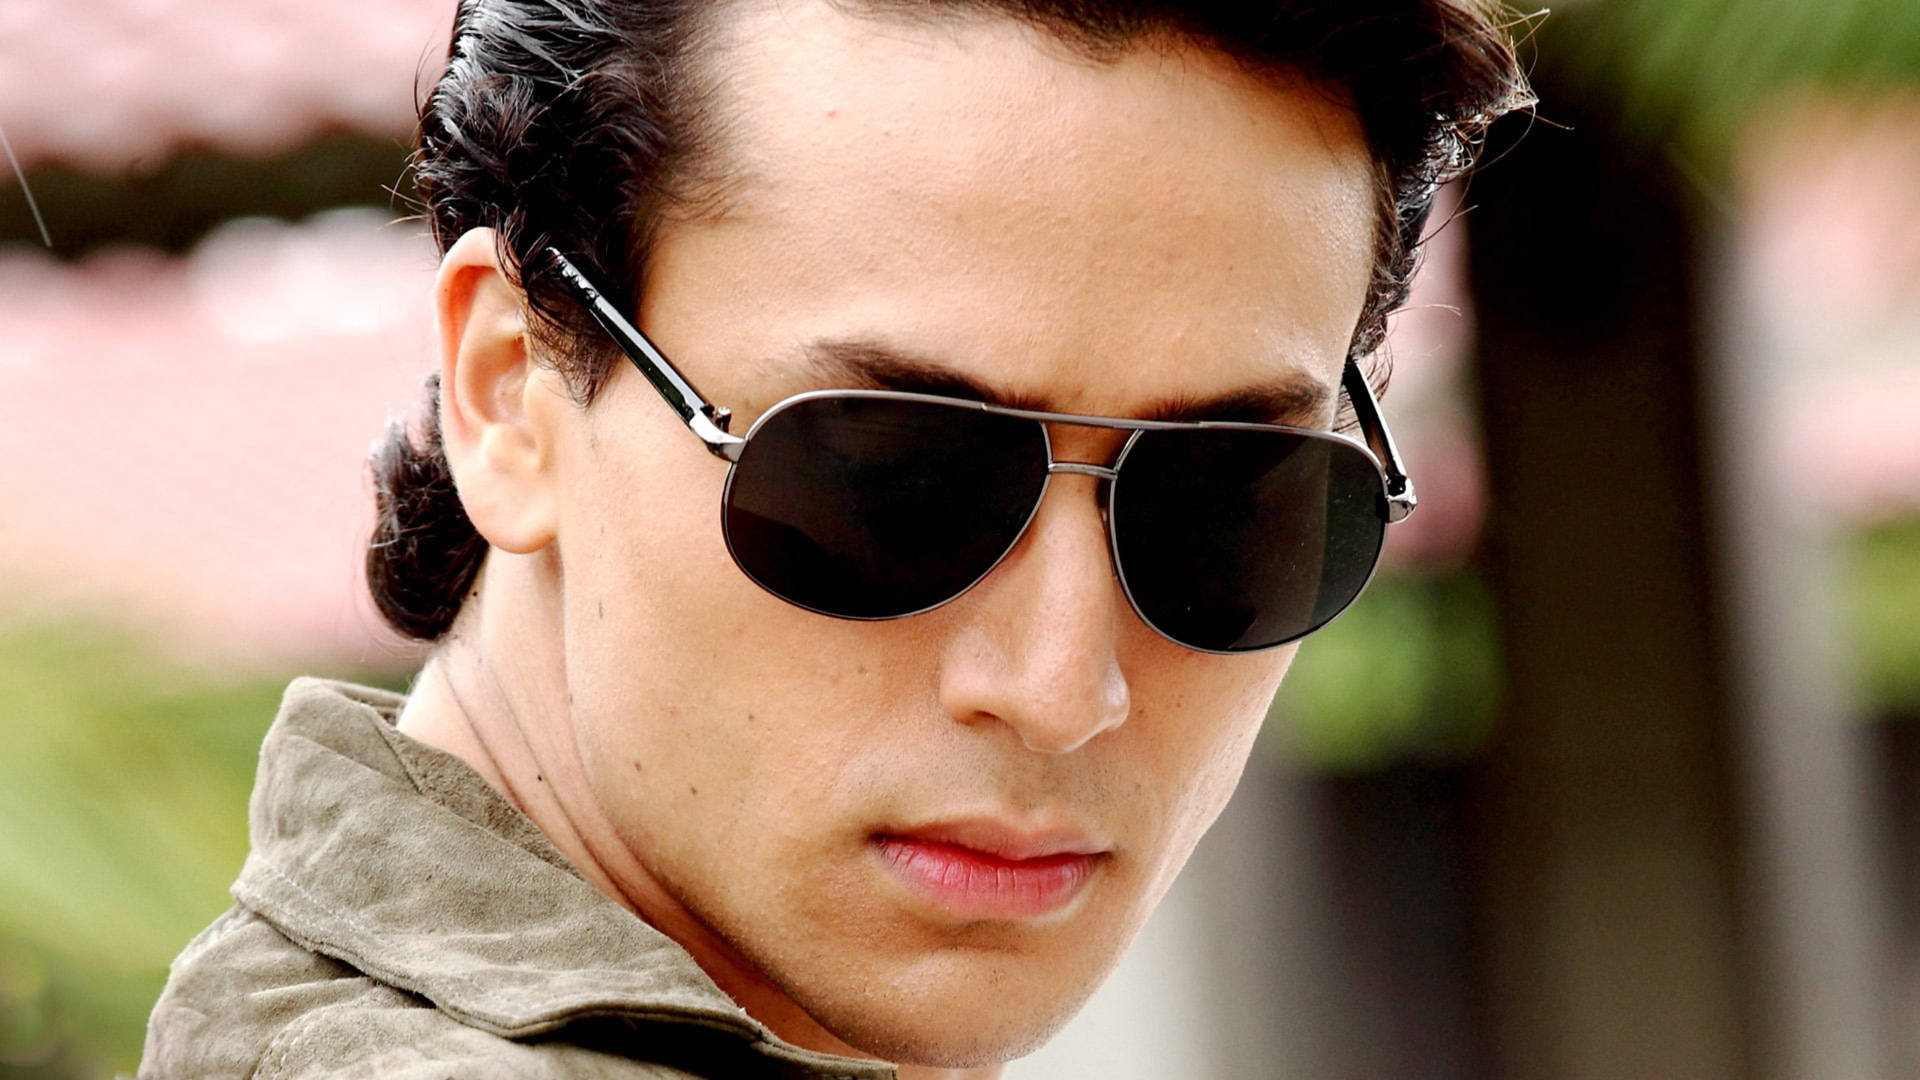 Tiger Shroff With Aviator Glasses Background